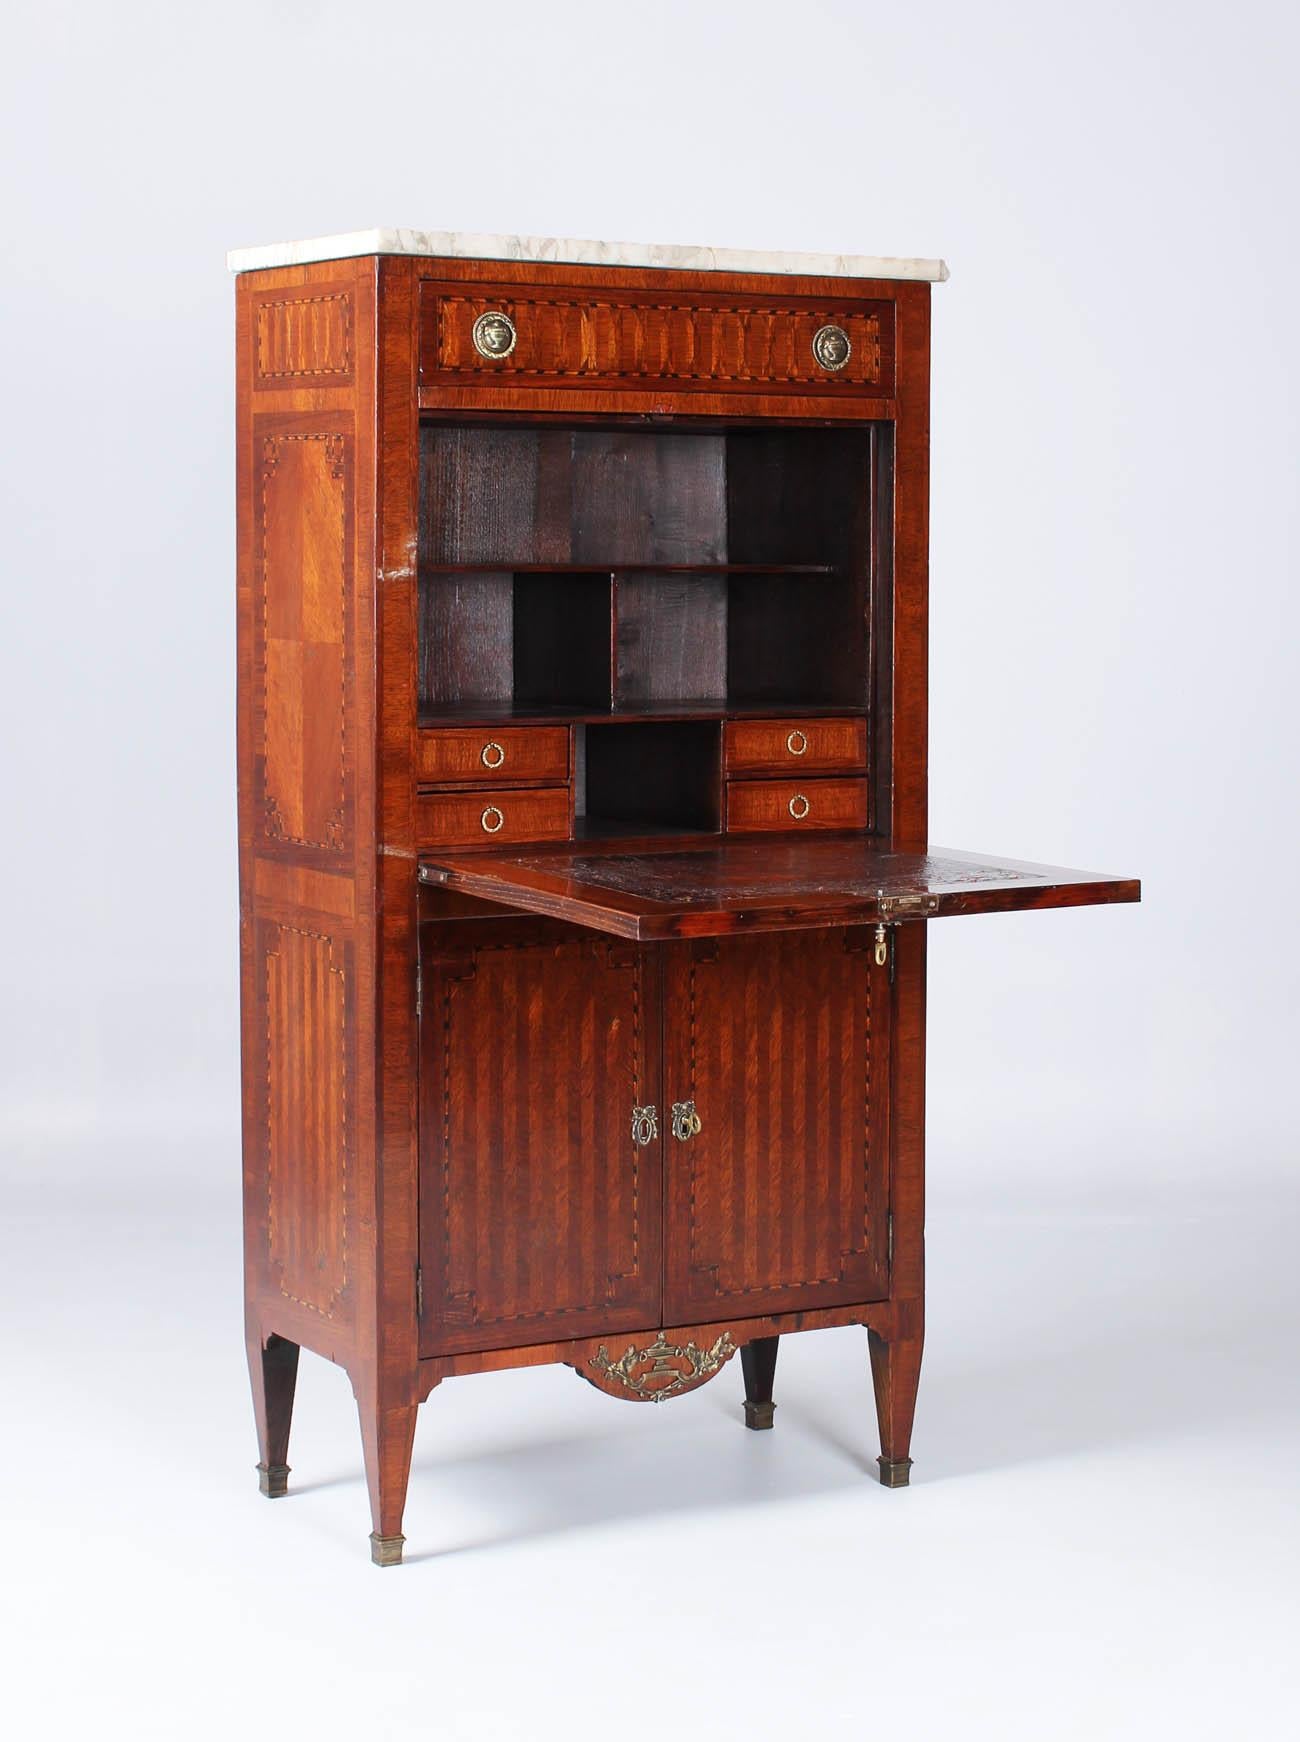 Very small secretary in Louis XVI style with fine marquetry

France
rosewood, mahogany and others
Louis XVI style, circa 1890

Dimensions: H x W x D: 141 x 71 x 37 cm

Description:
Straight-lined secretaire in rosewood veneer with a strict